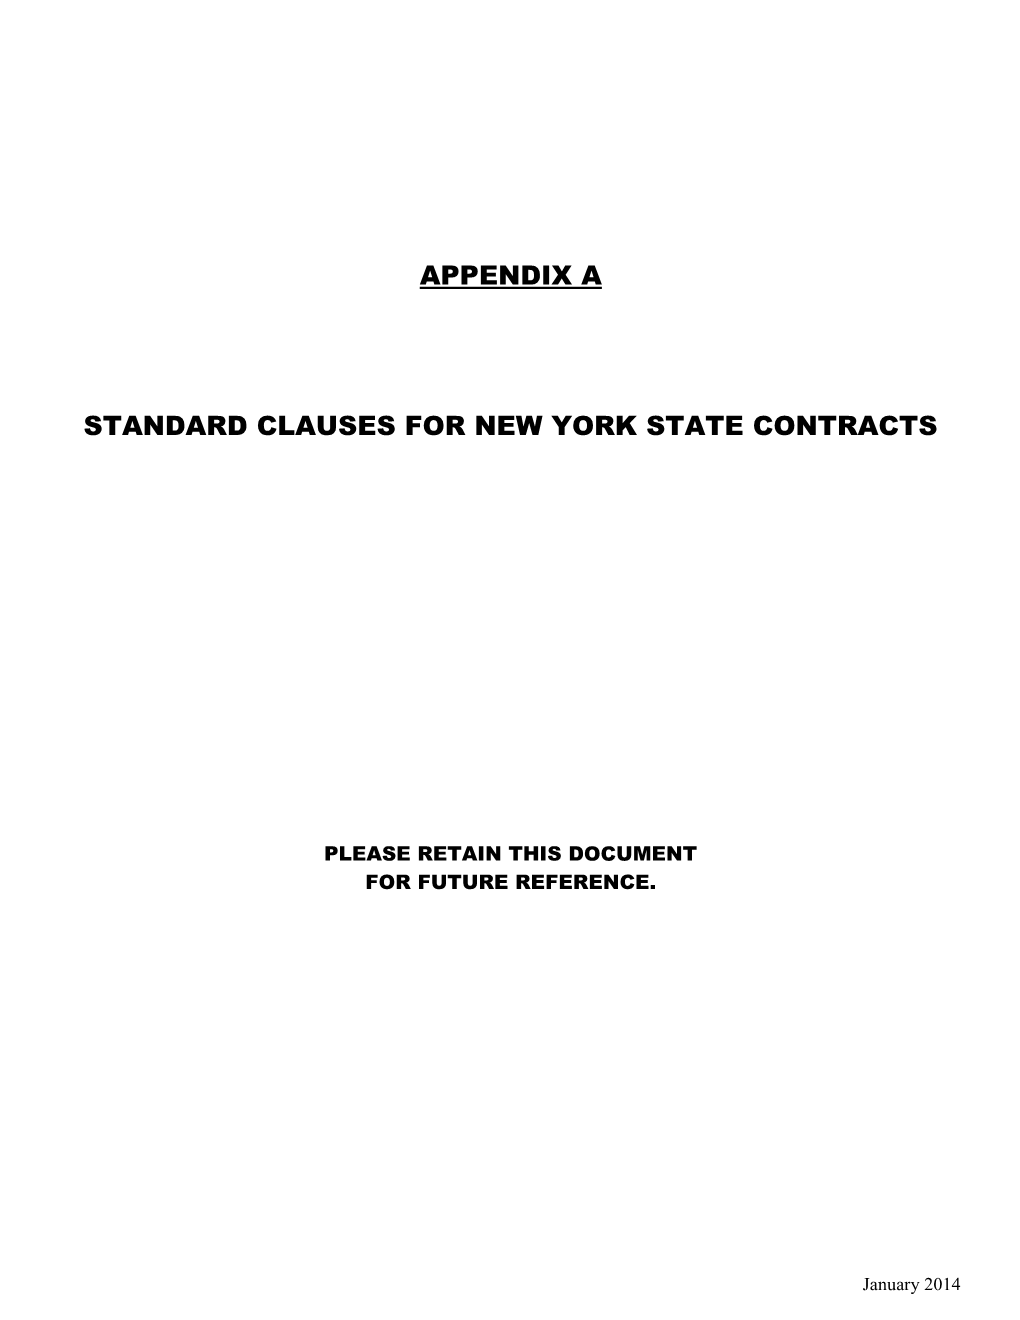 Standard Clauses for Nys Contractsappendix A